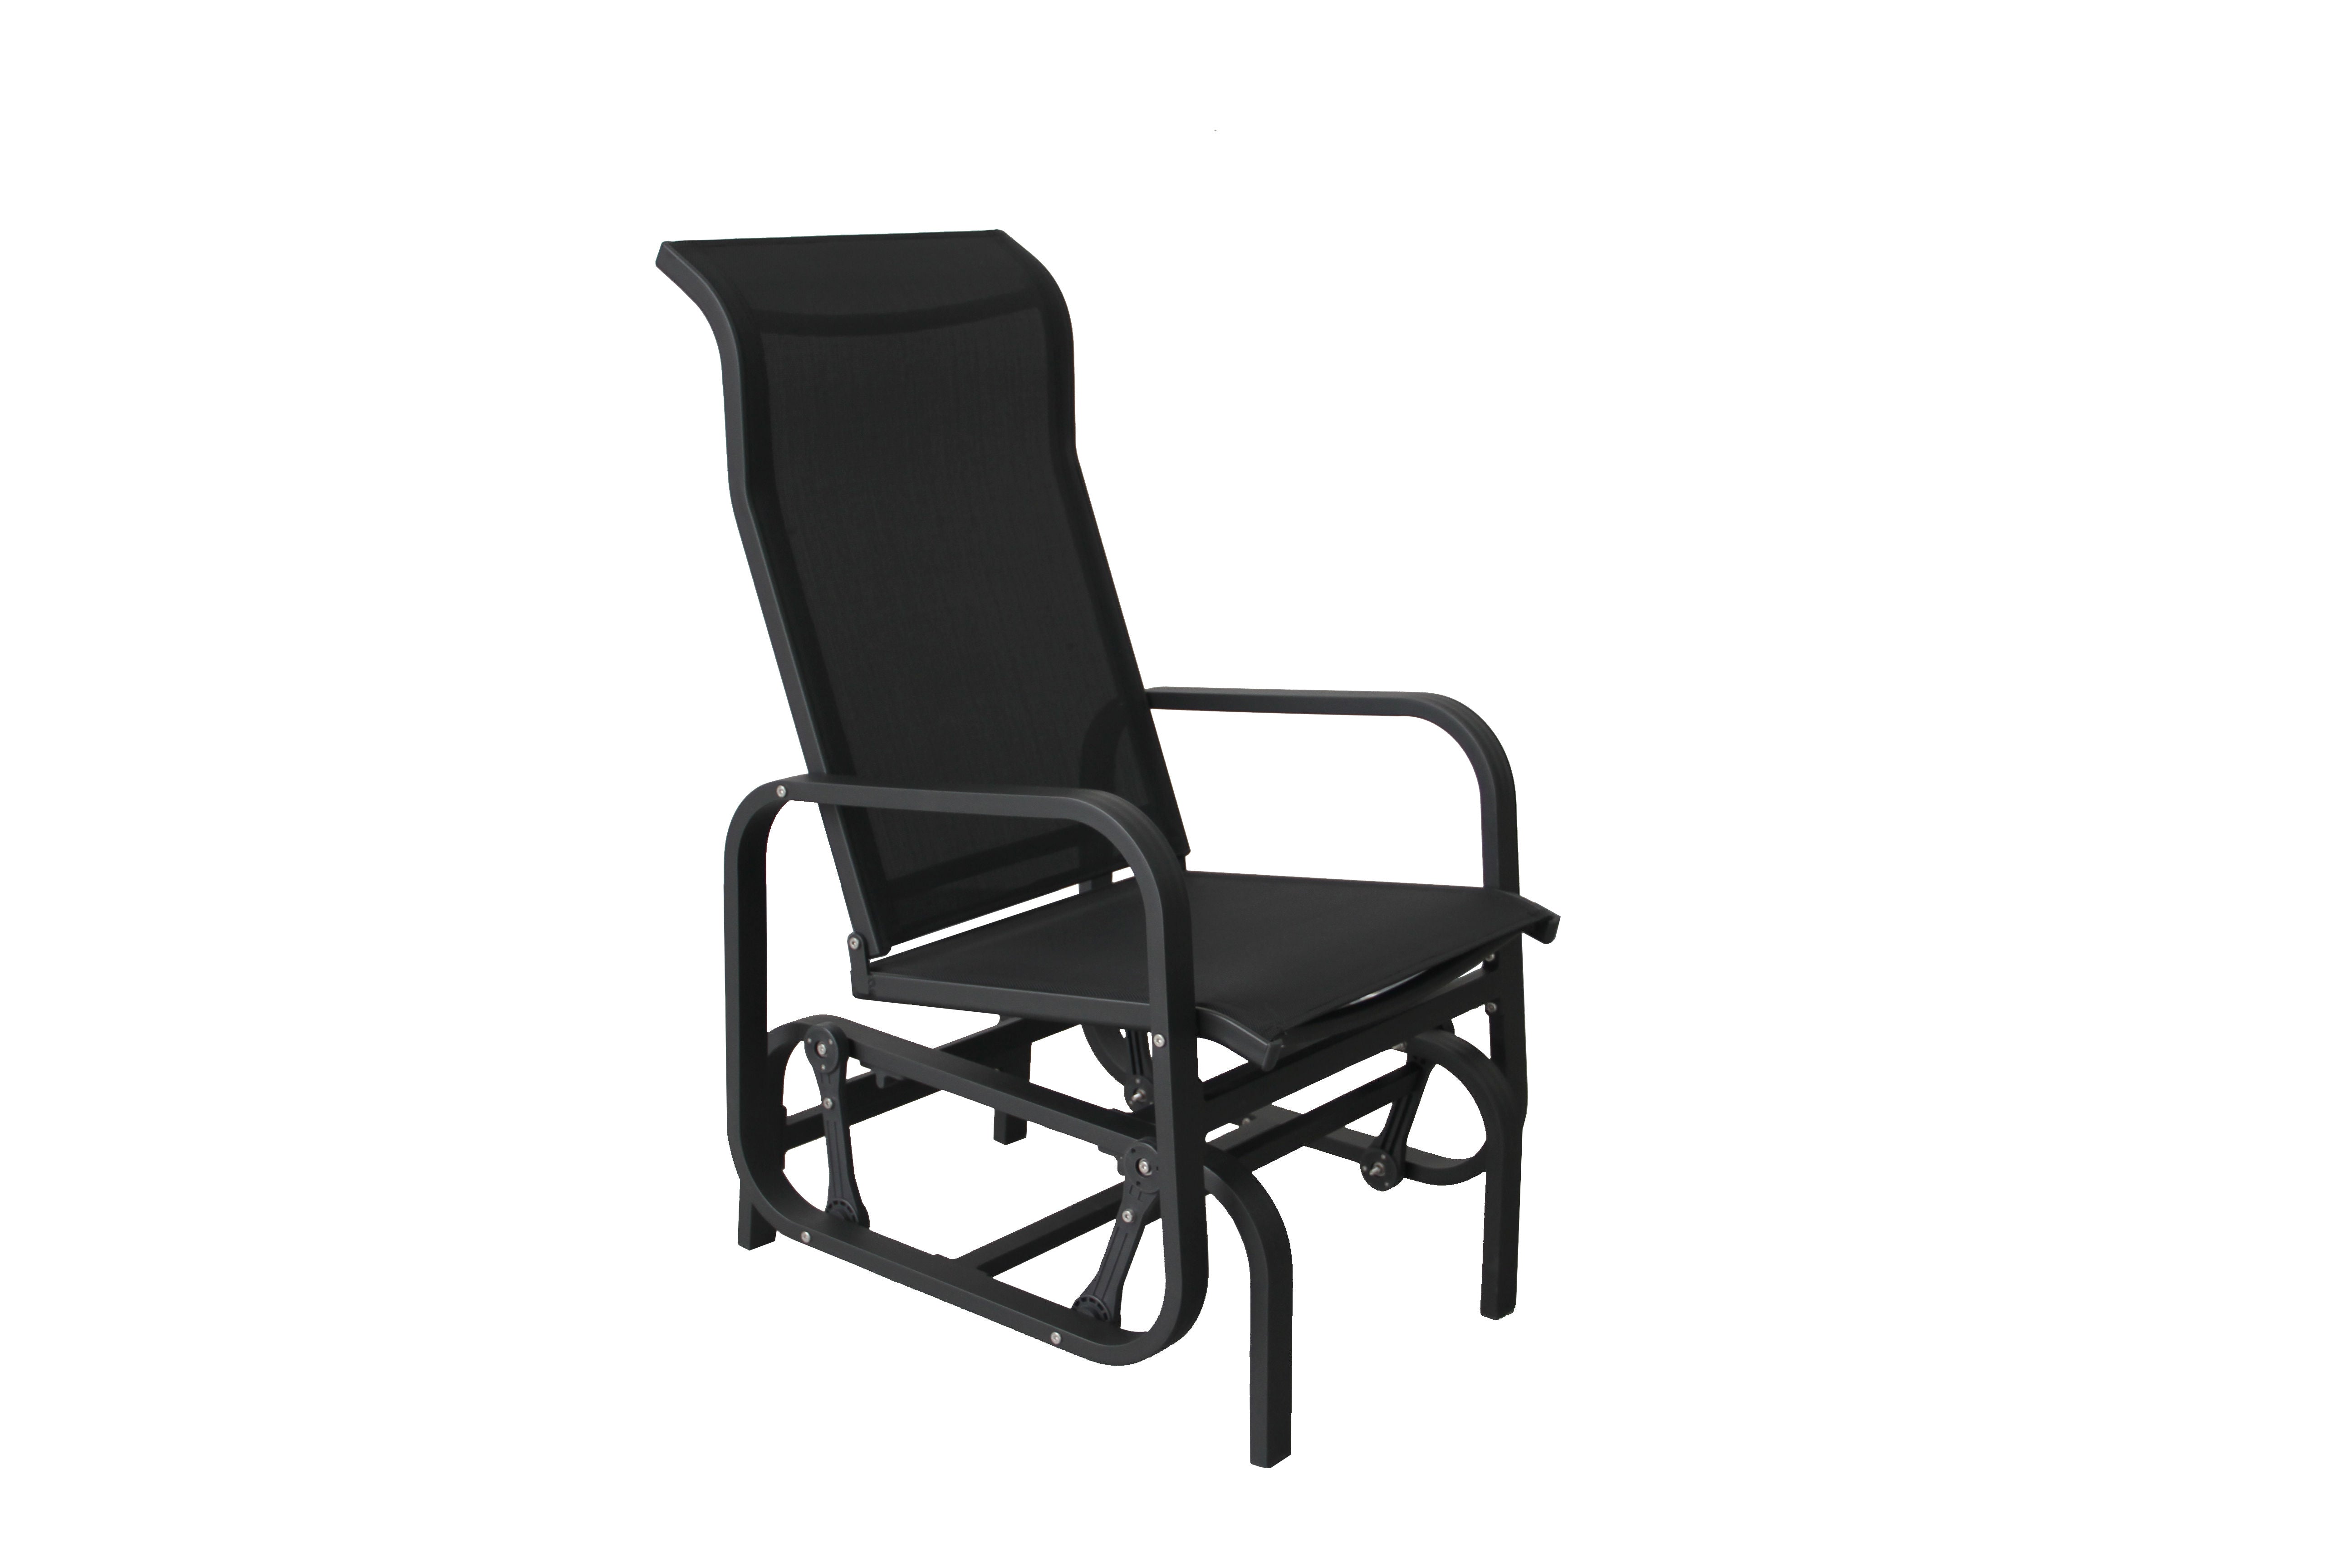 PatioZone 1-Seater Oscillating Chair in Textilene with Aluminum Frame (PZ-SN23-020) - Black